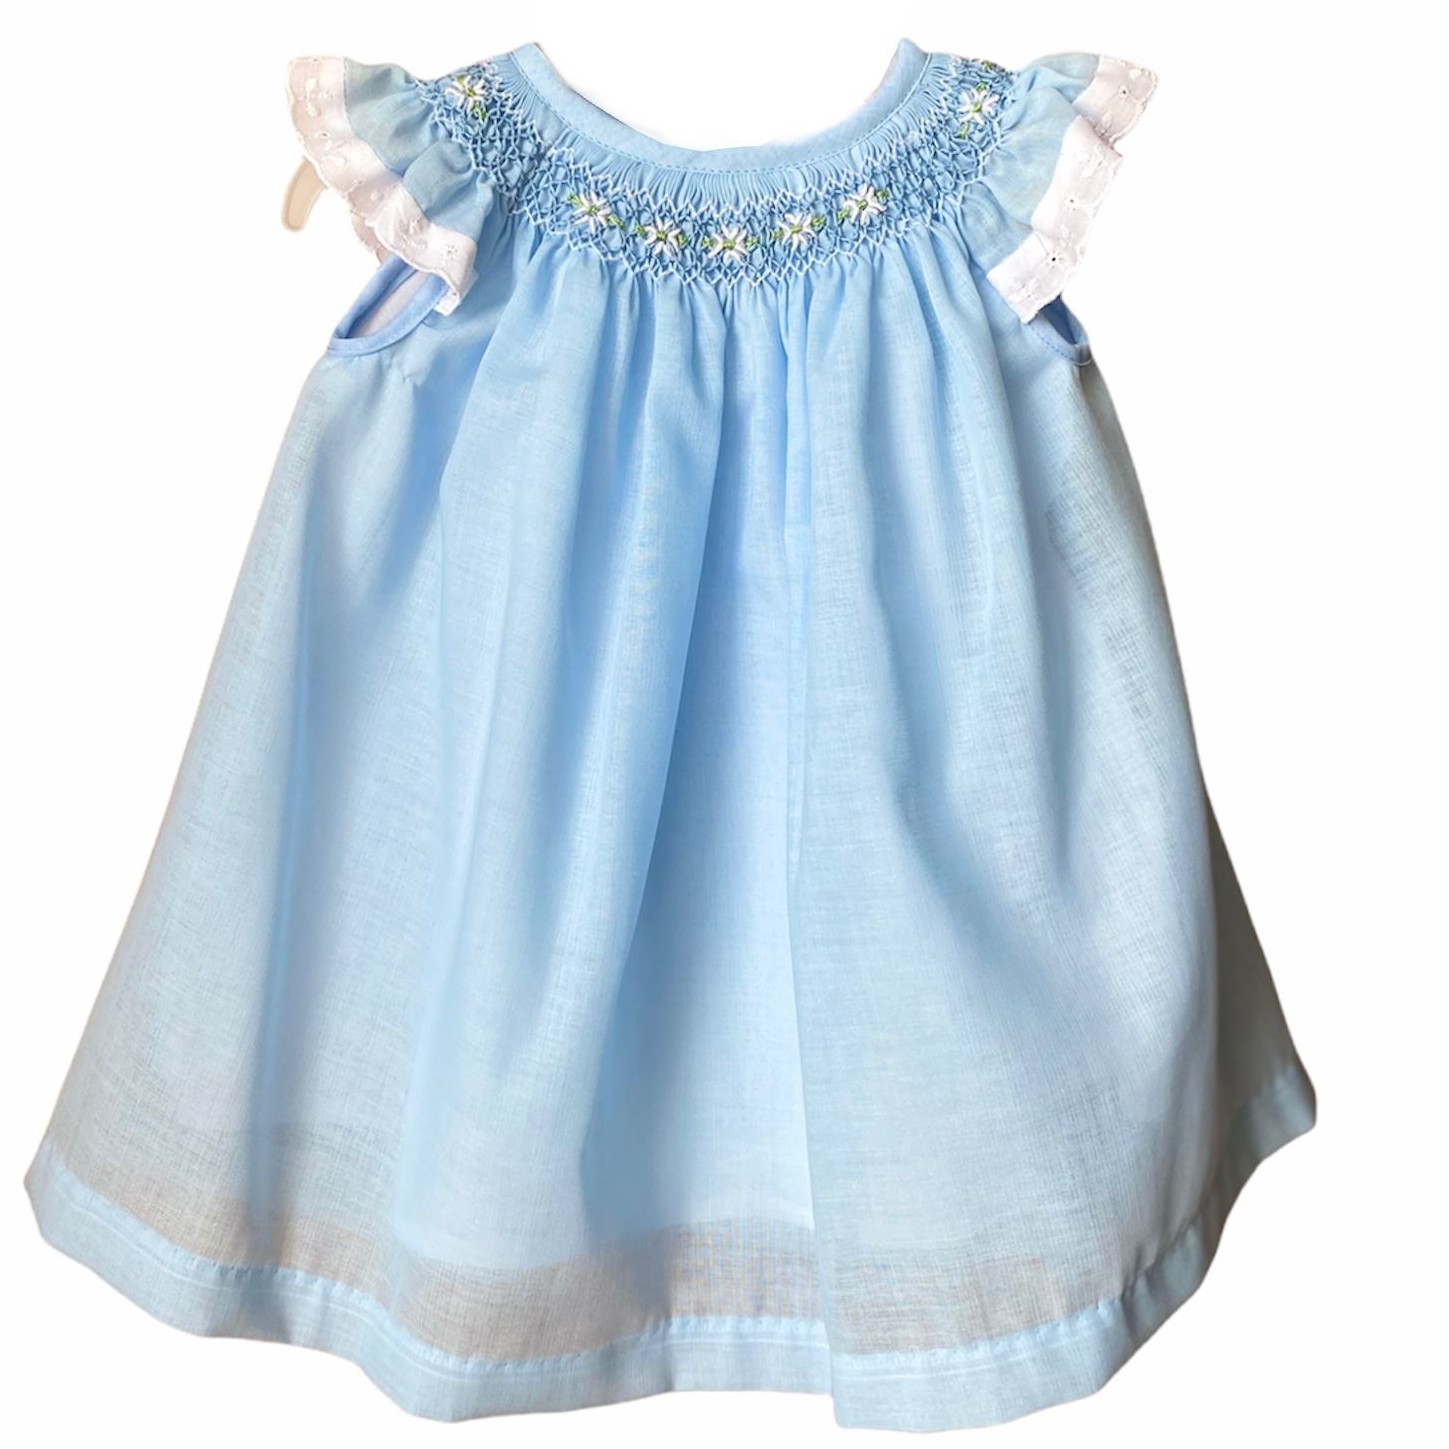 Girl's Dress with Hand Embroidery - Blue Sky Color with White and Flowers